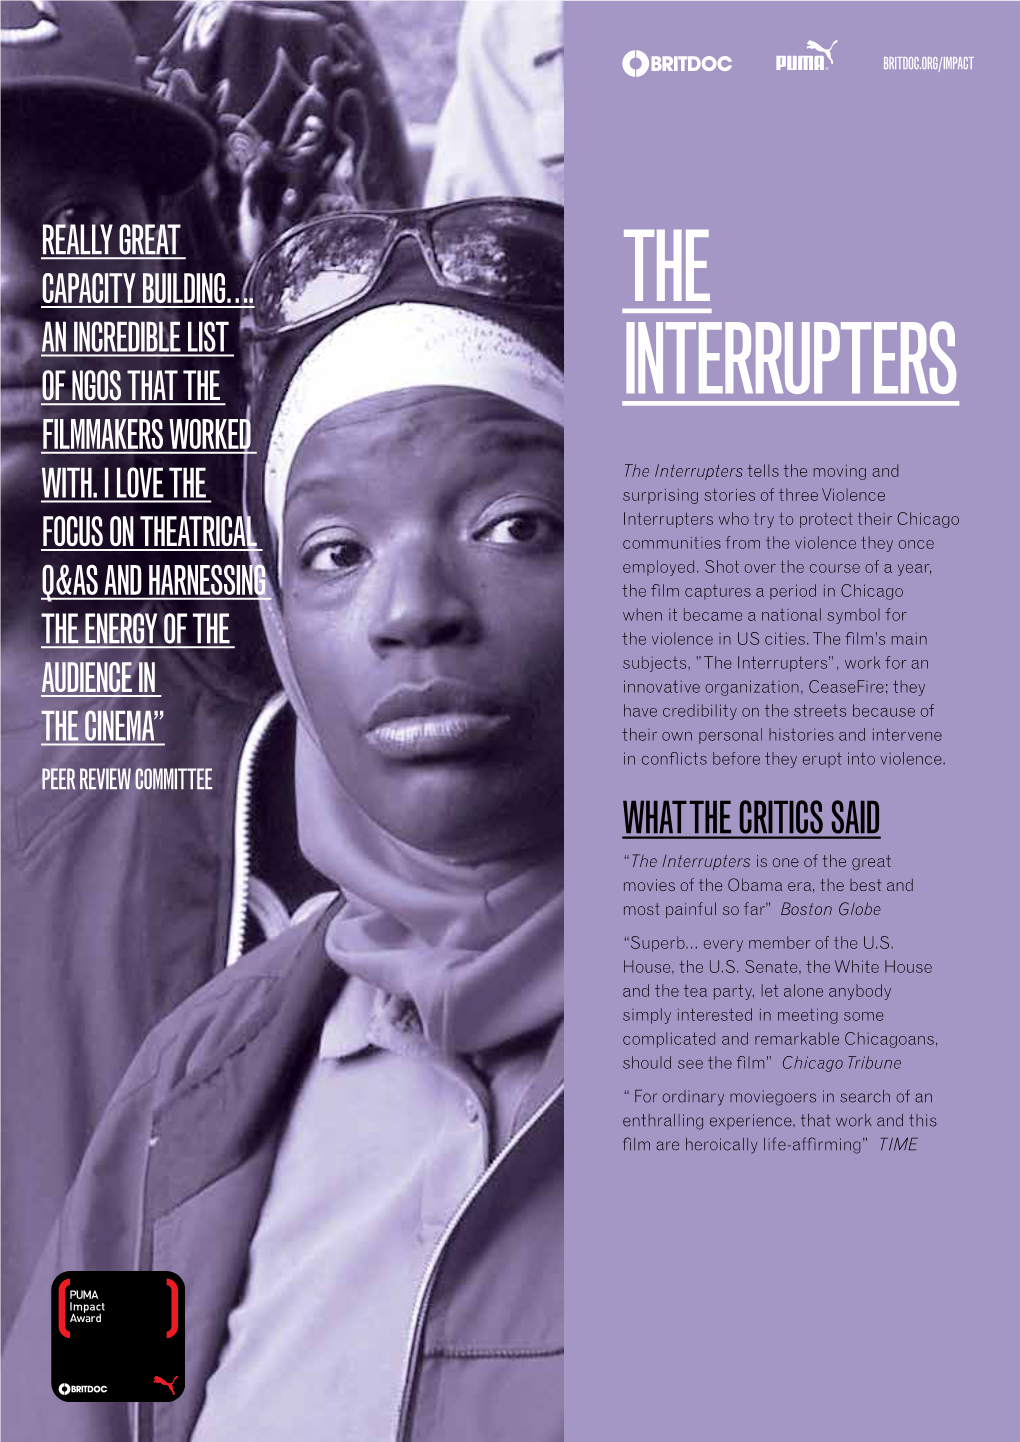 THE Interrupters Filmmakers Worked the Interrupters Tells the Moving and With